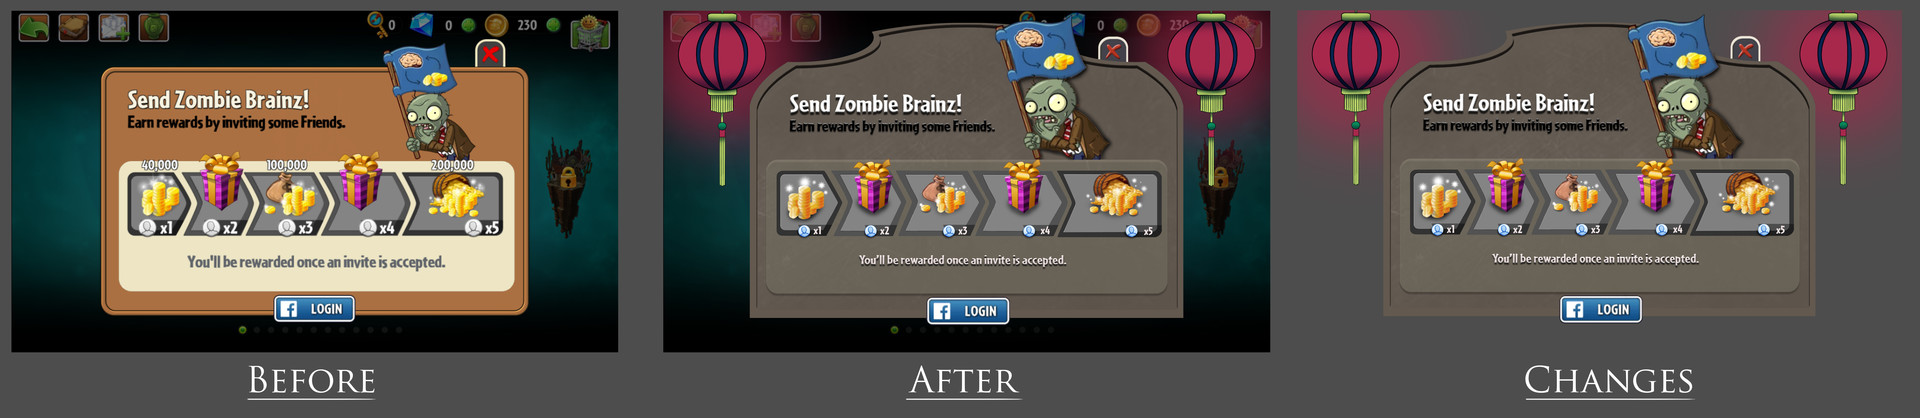 Avriel Lai - Plants vs. Zombies 2 - Chinese Hungry Ghost Festival